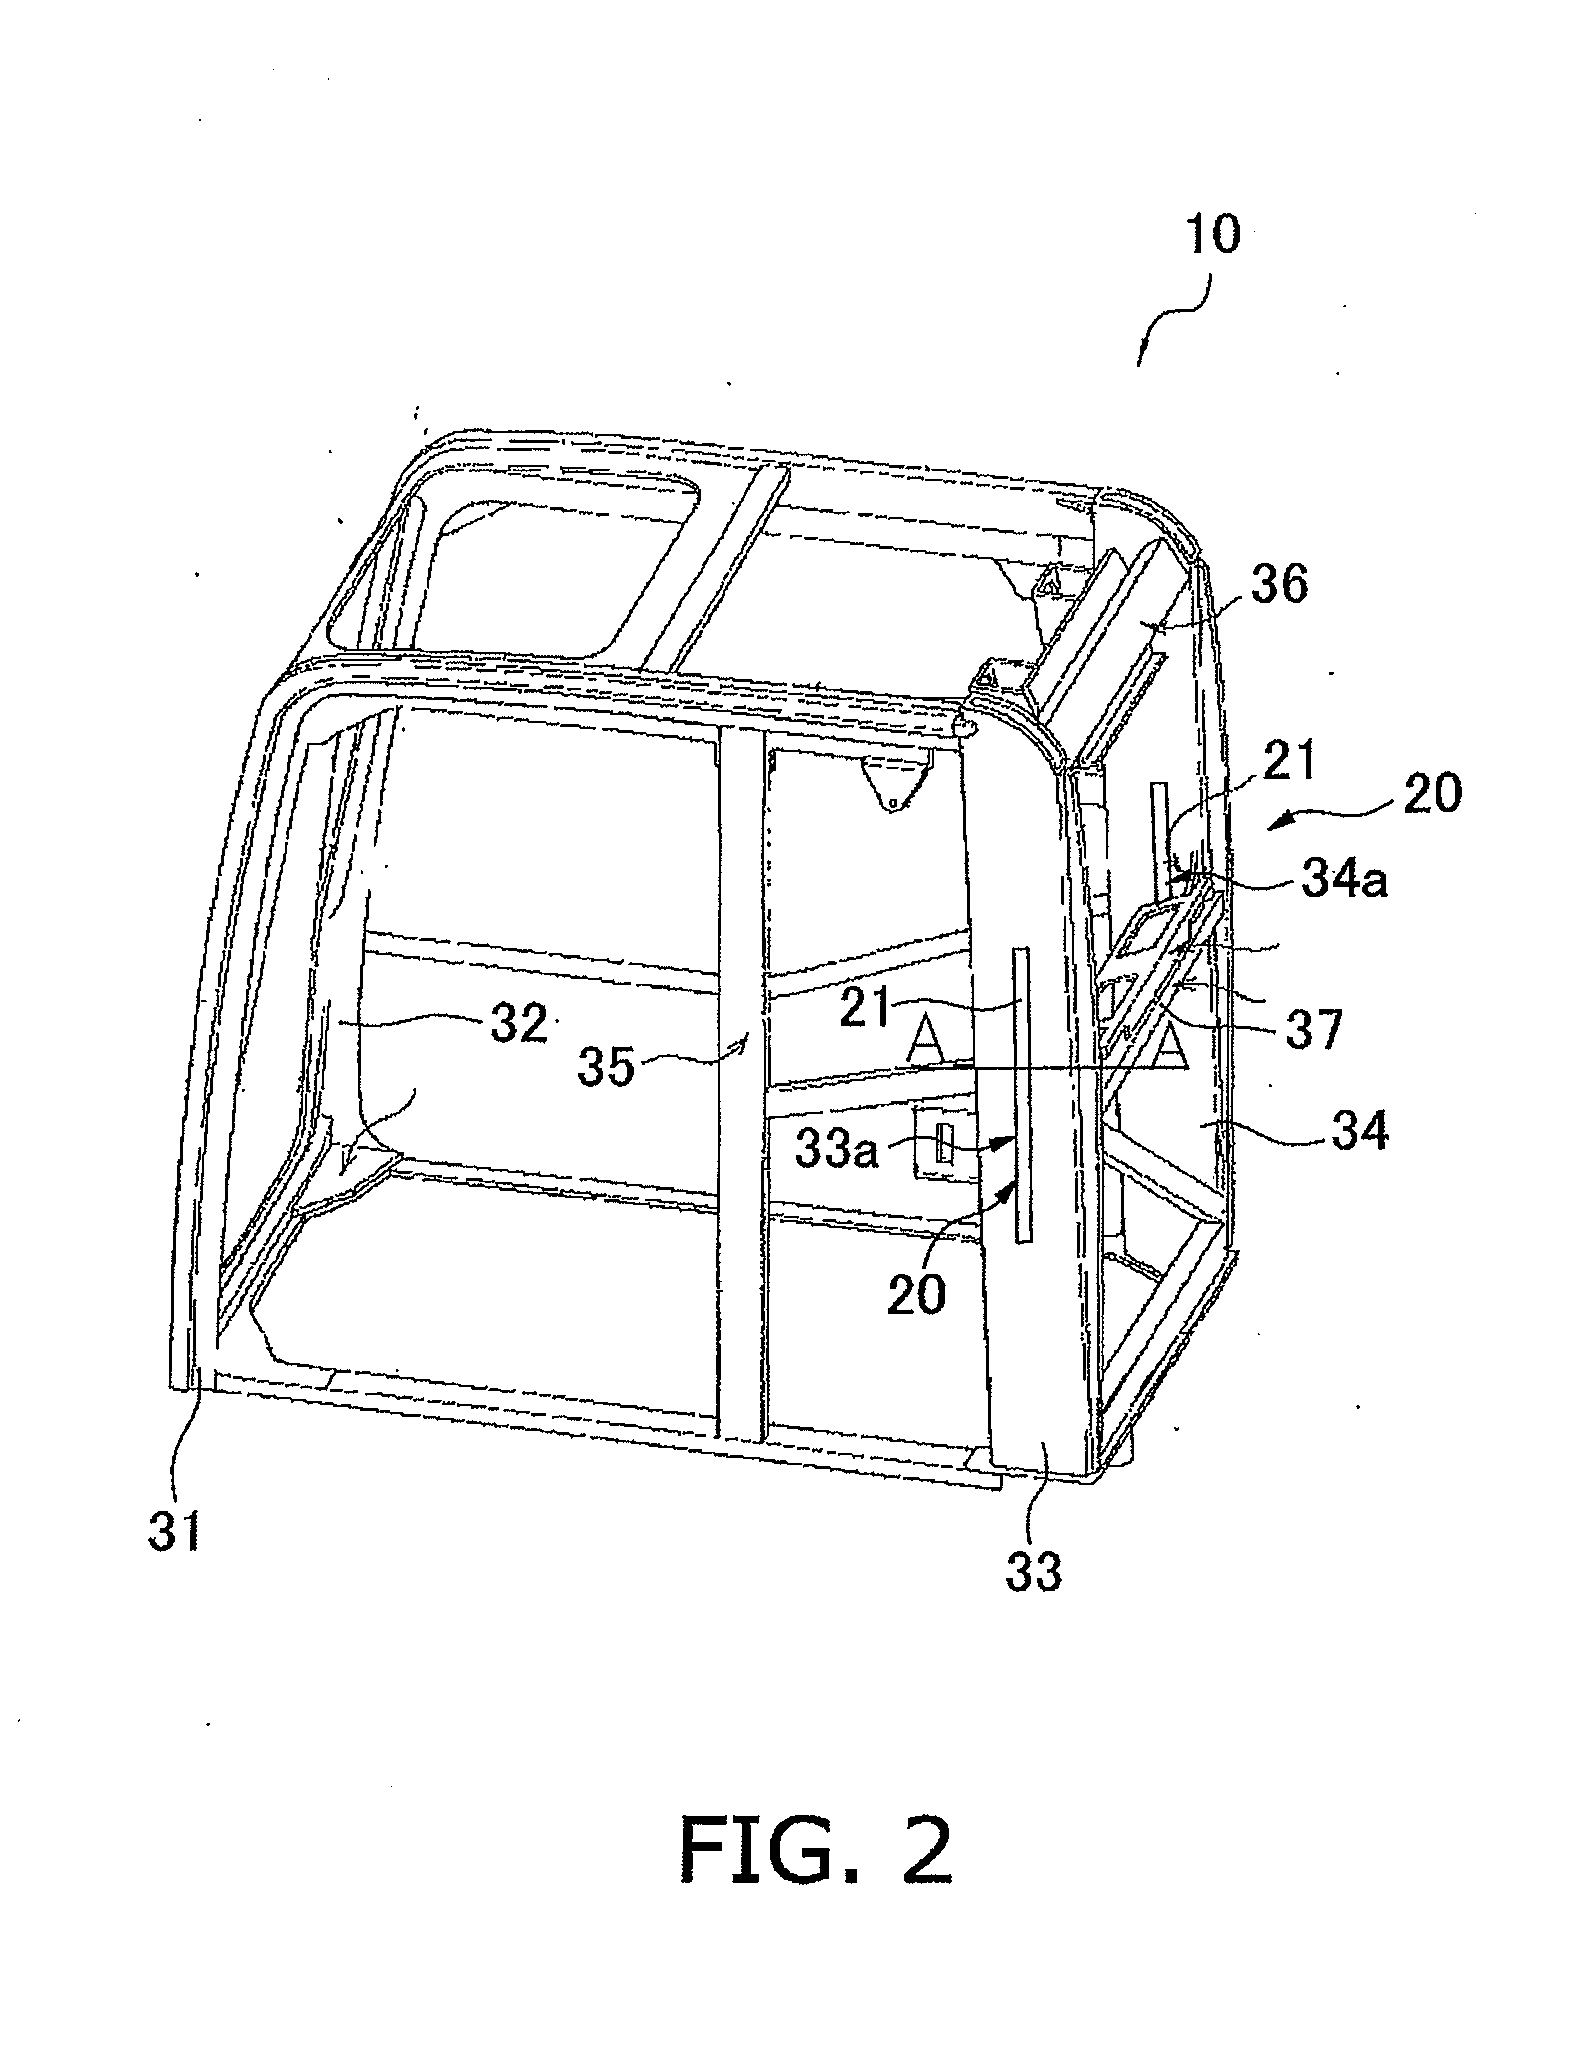 Reinforcement structure for pipe and cab structure for construction machine having the same